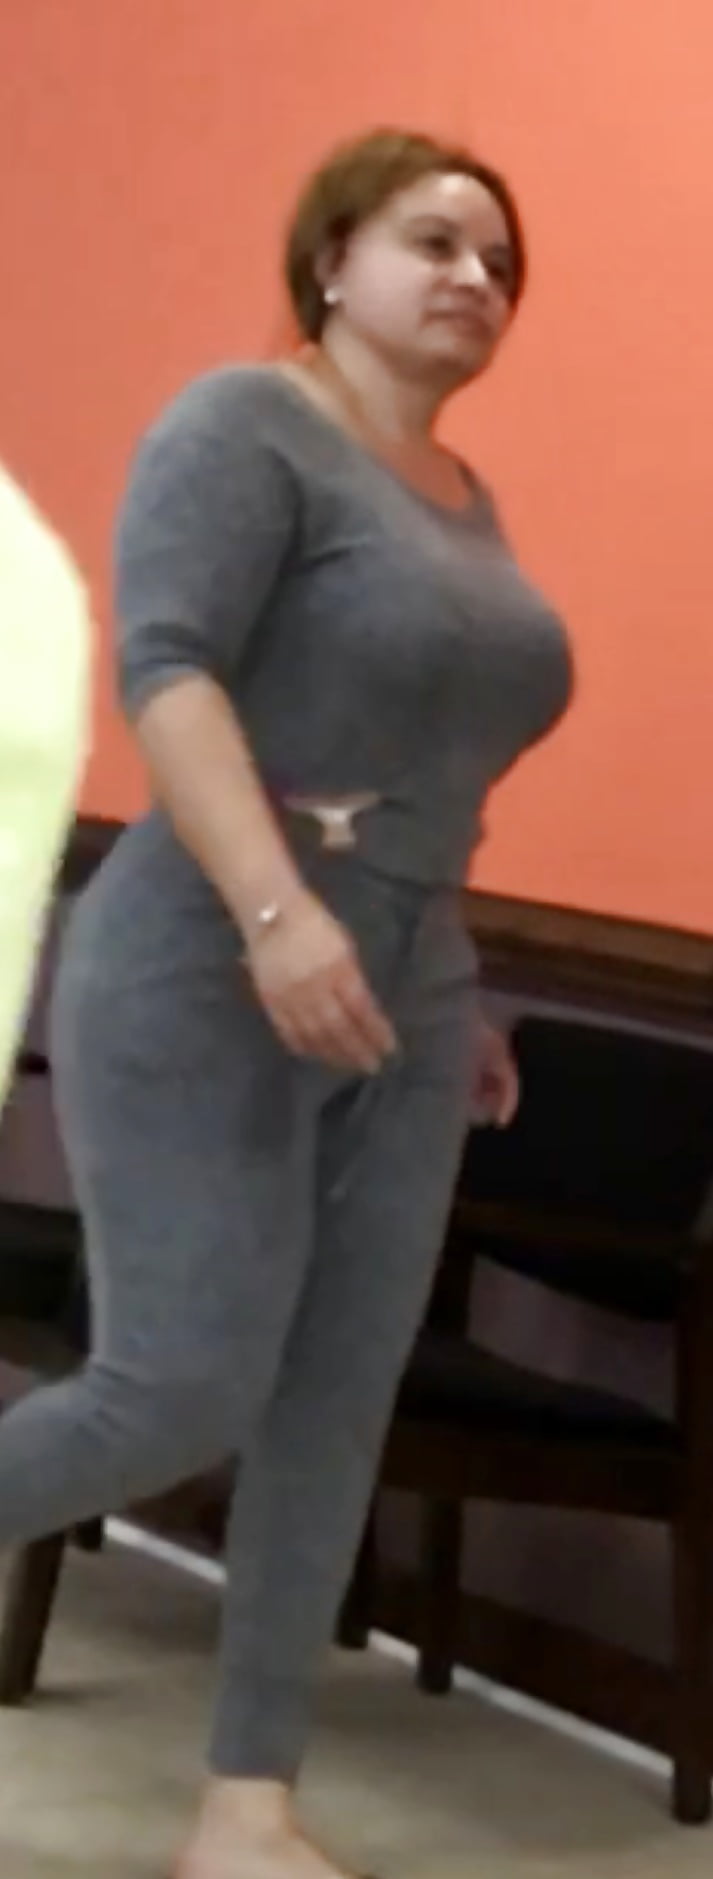 Milf working that ass back and forward (22/24)